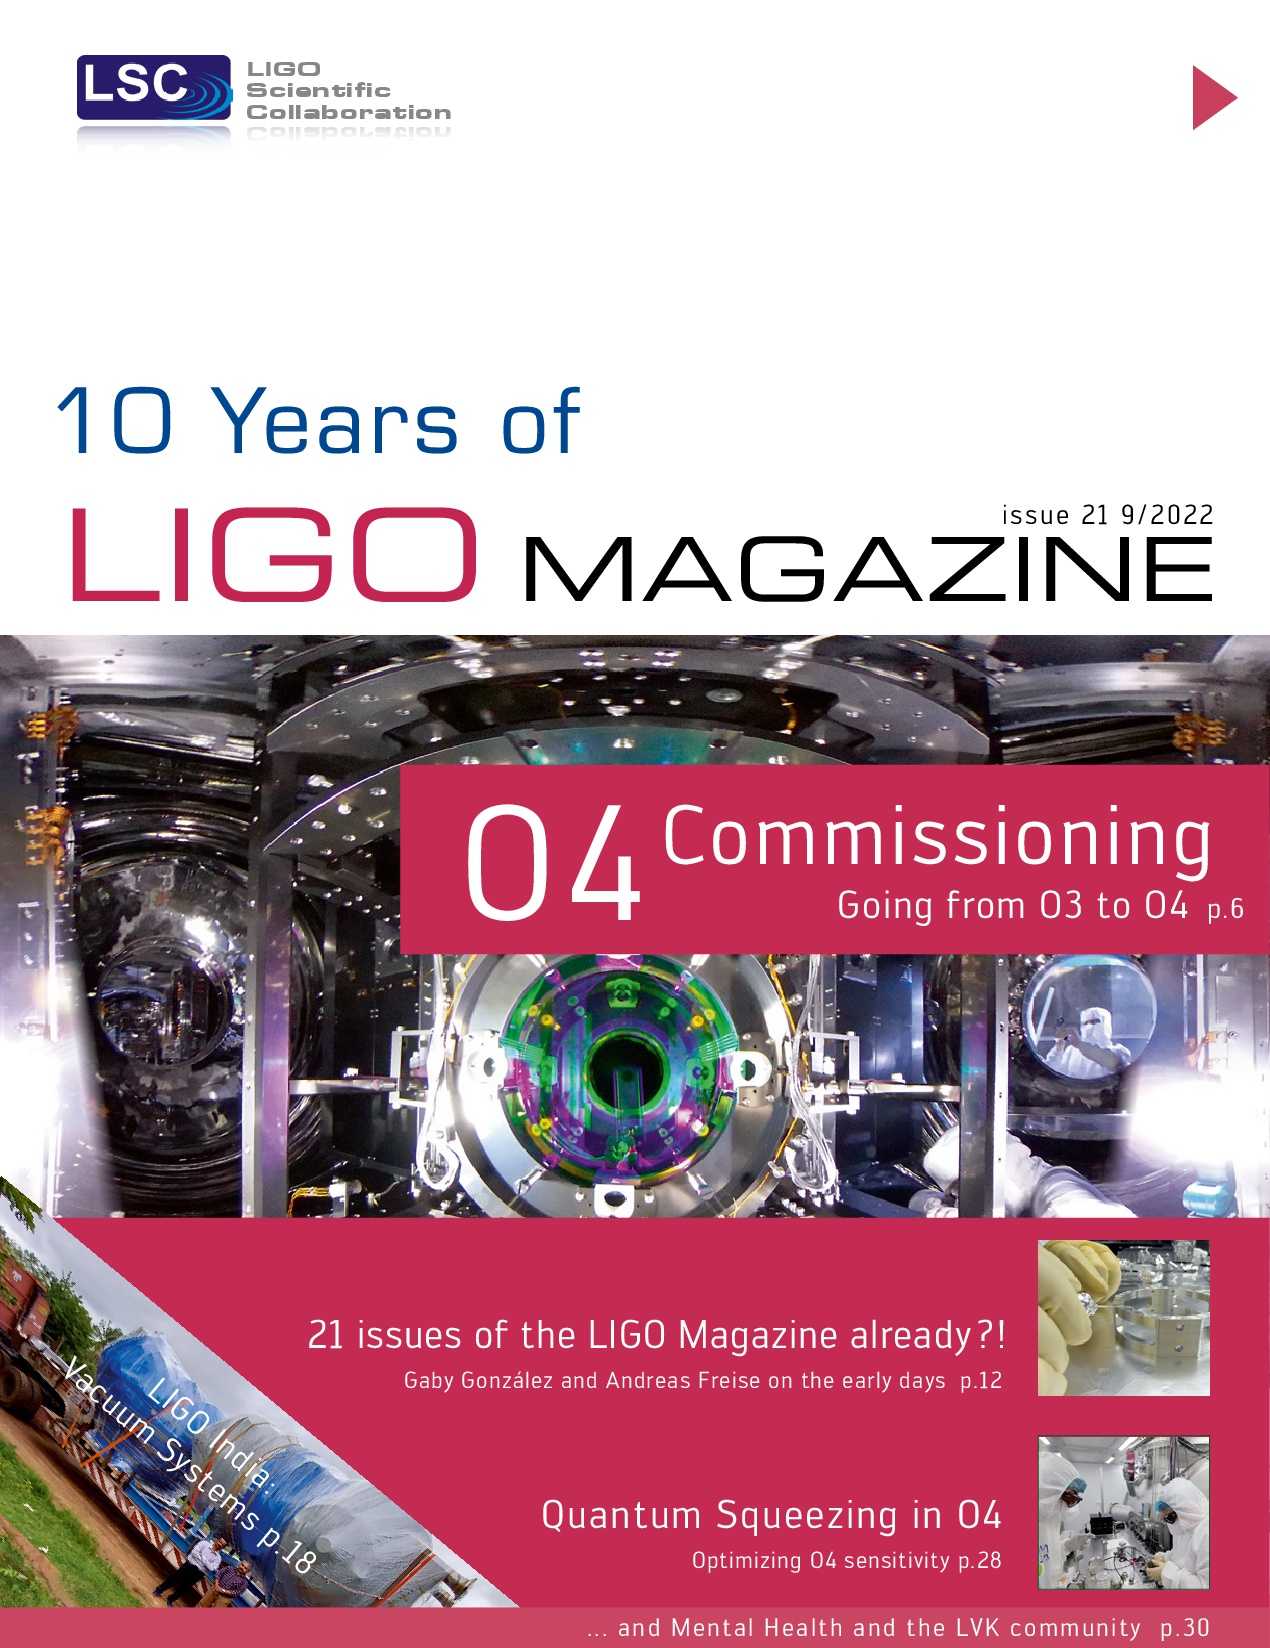 News-Image 13 of: New LIGO Magazine Issue 21 is out